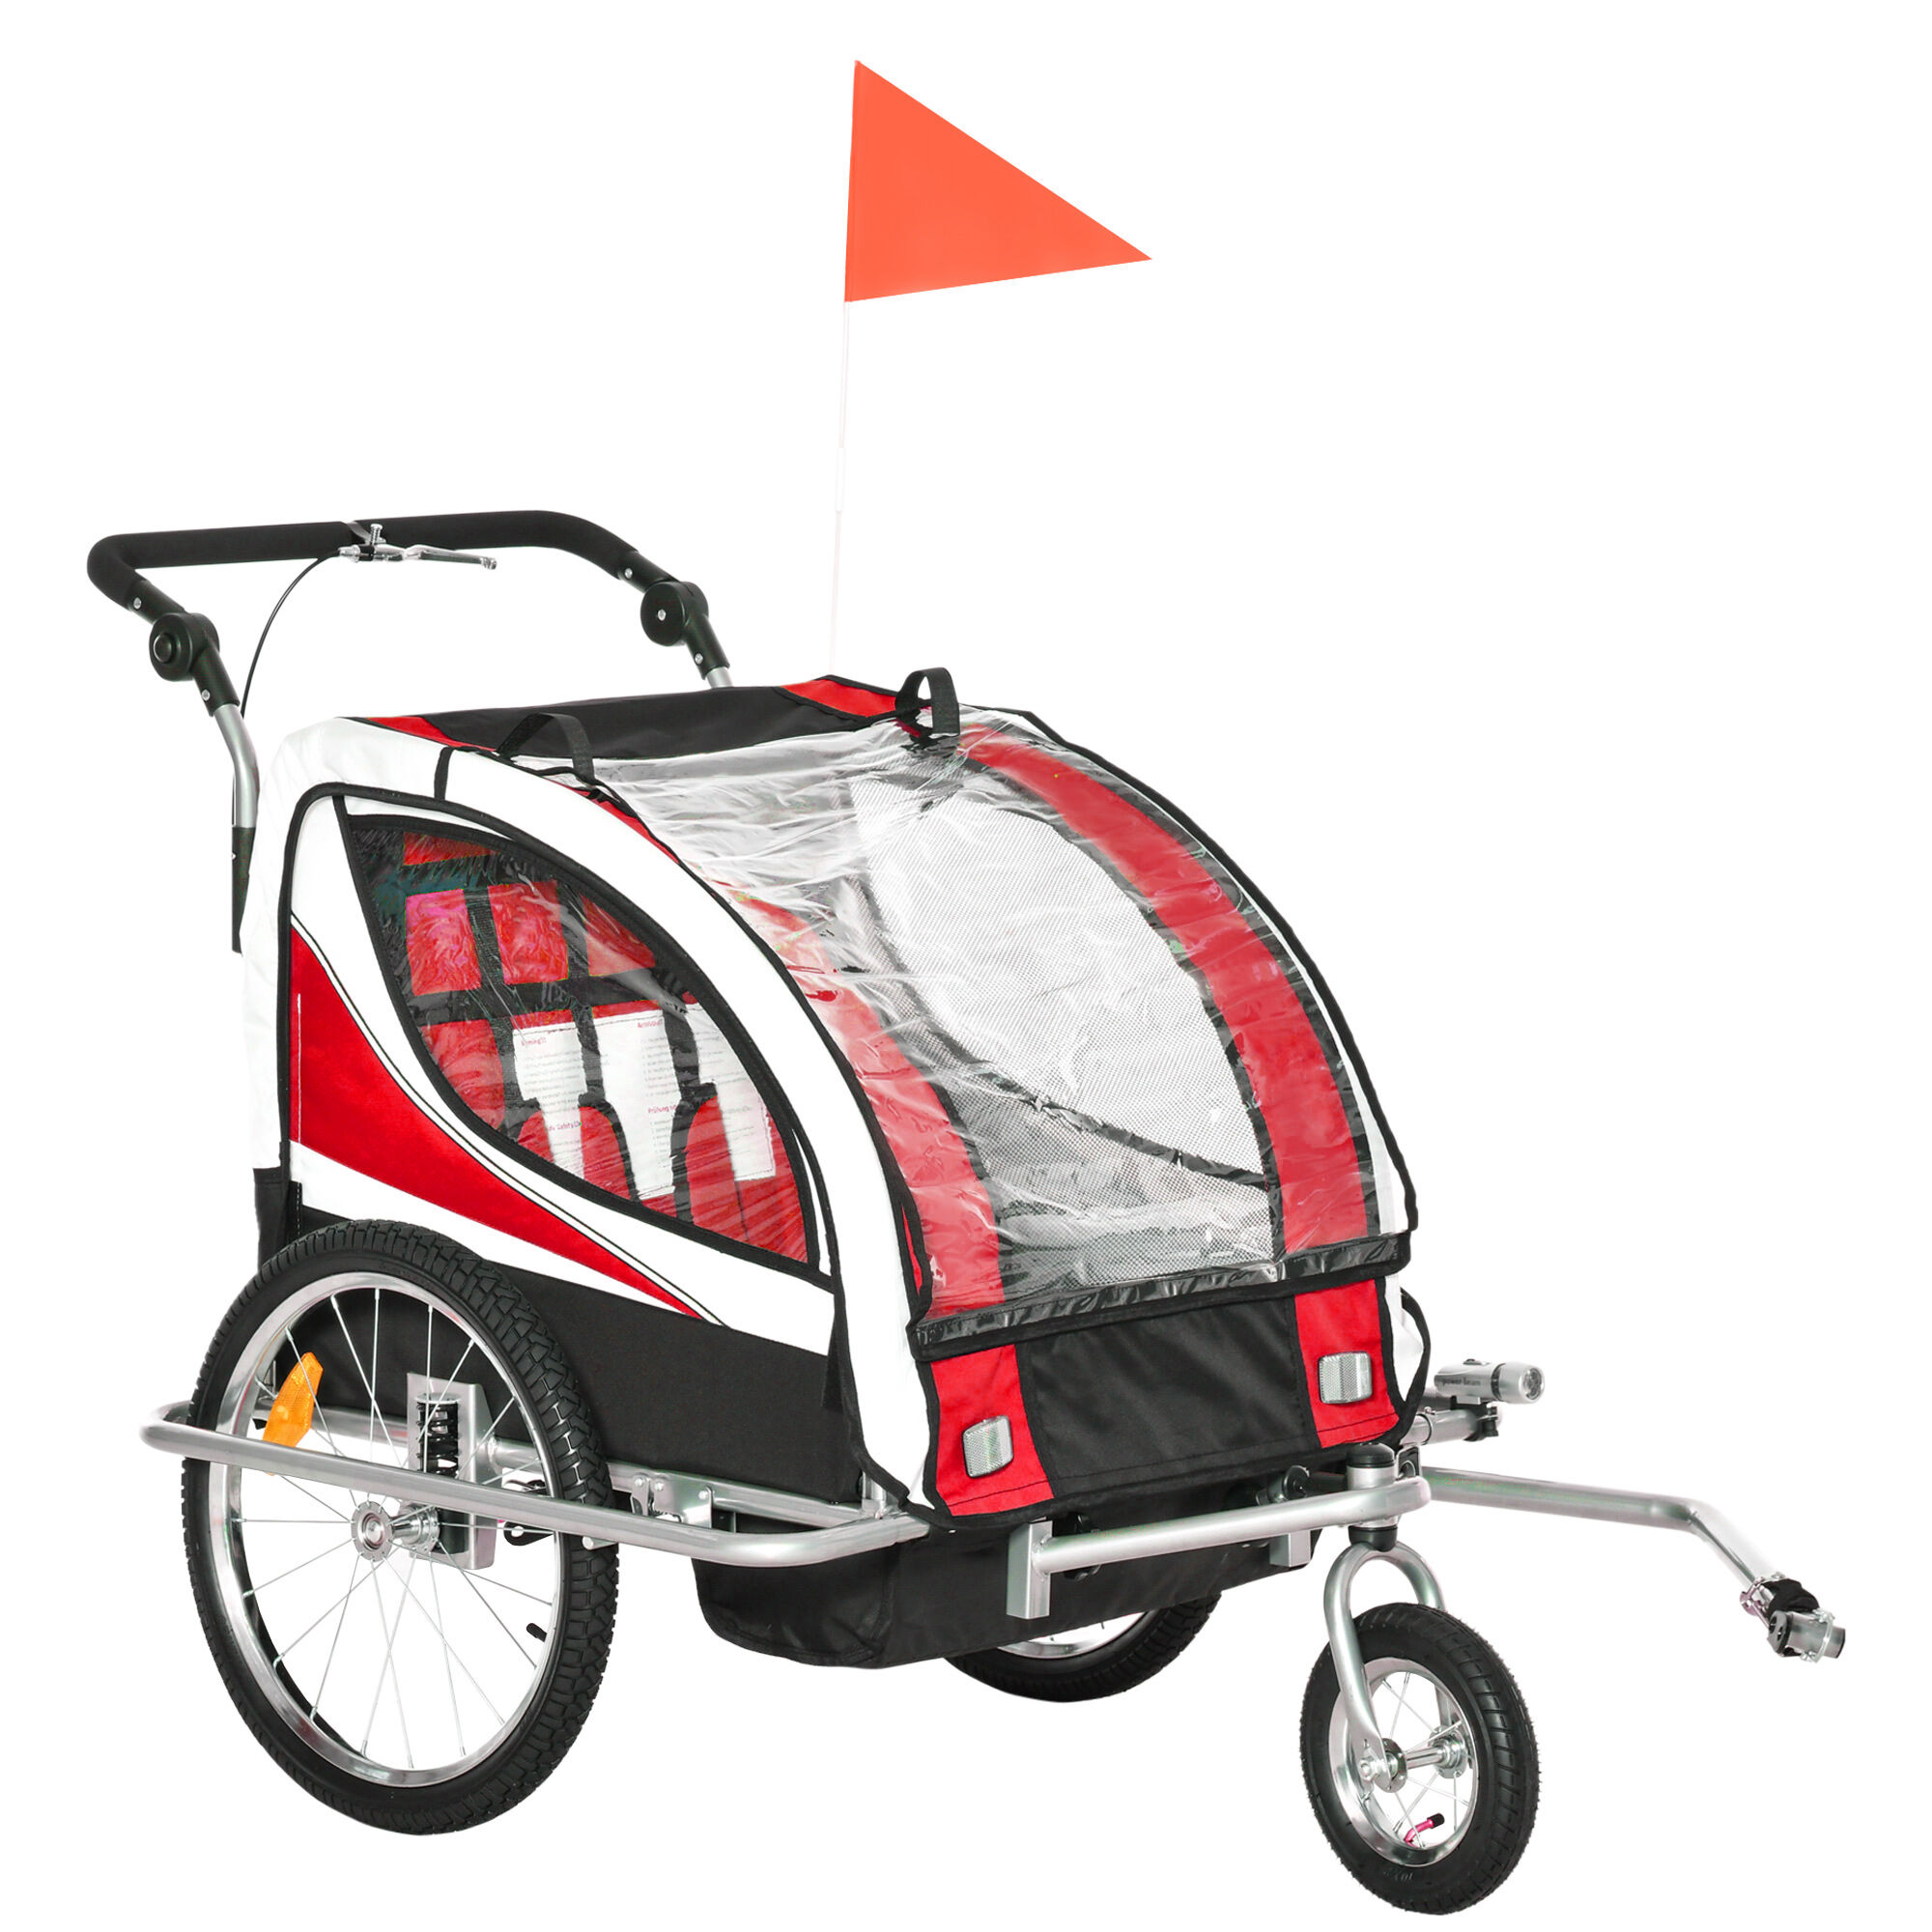 Aosom Folding Child Bike Baby Trailer with Safety Flag, Light Reflectors, & 5 Point Harness, Red